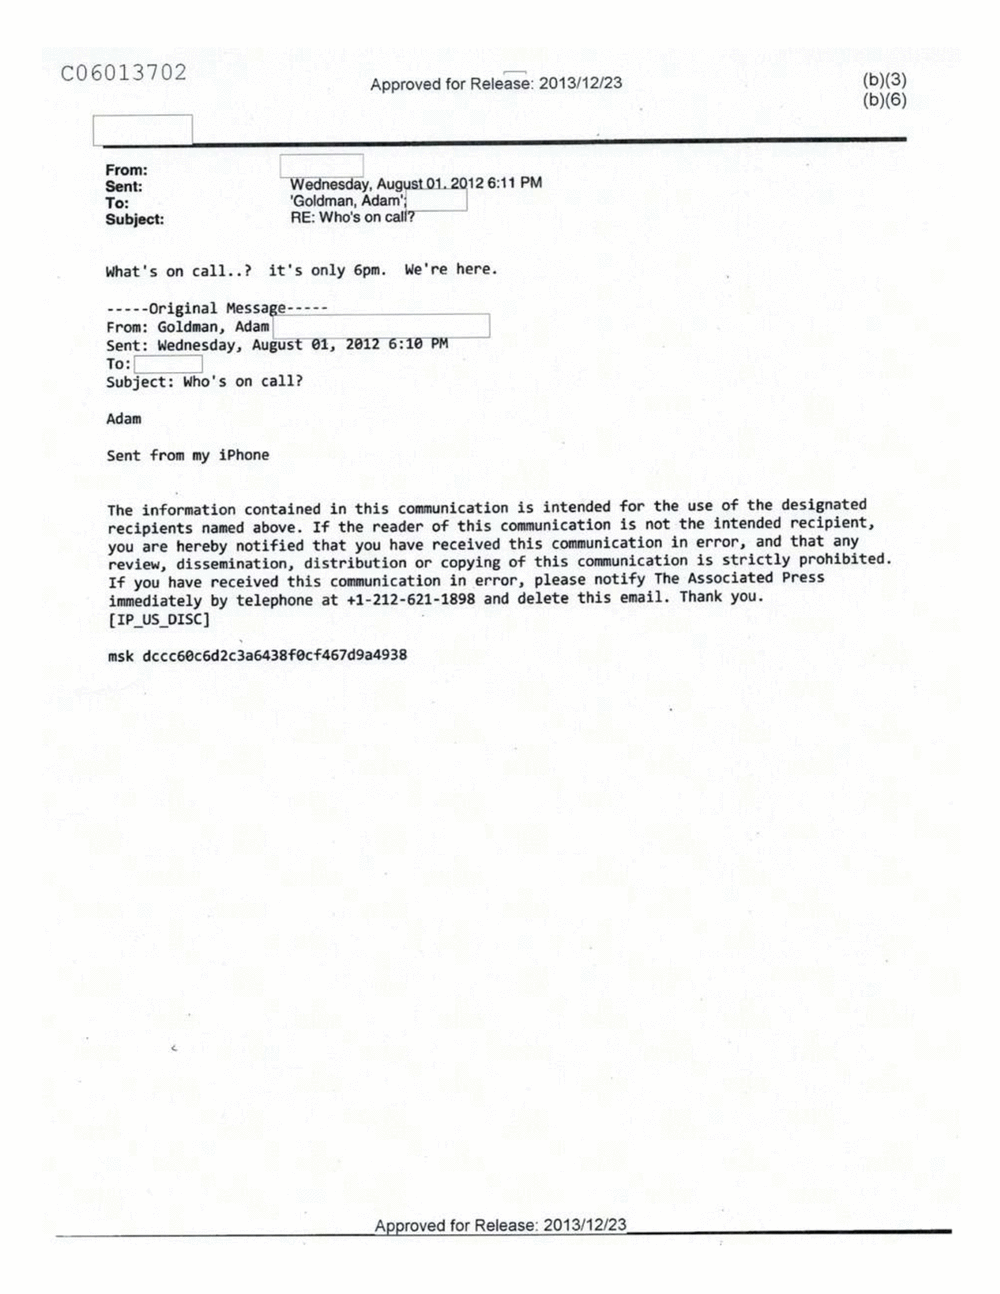 Page 562 from Email Correspondence Between Reporters and CIA Flacks